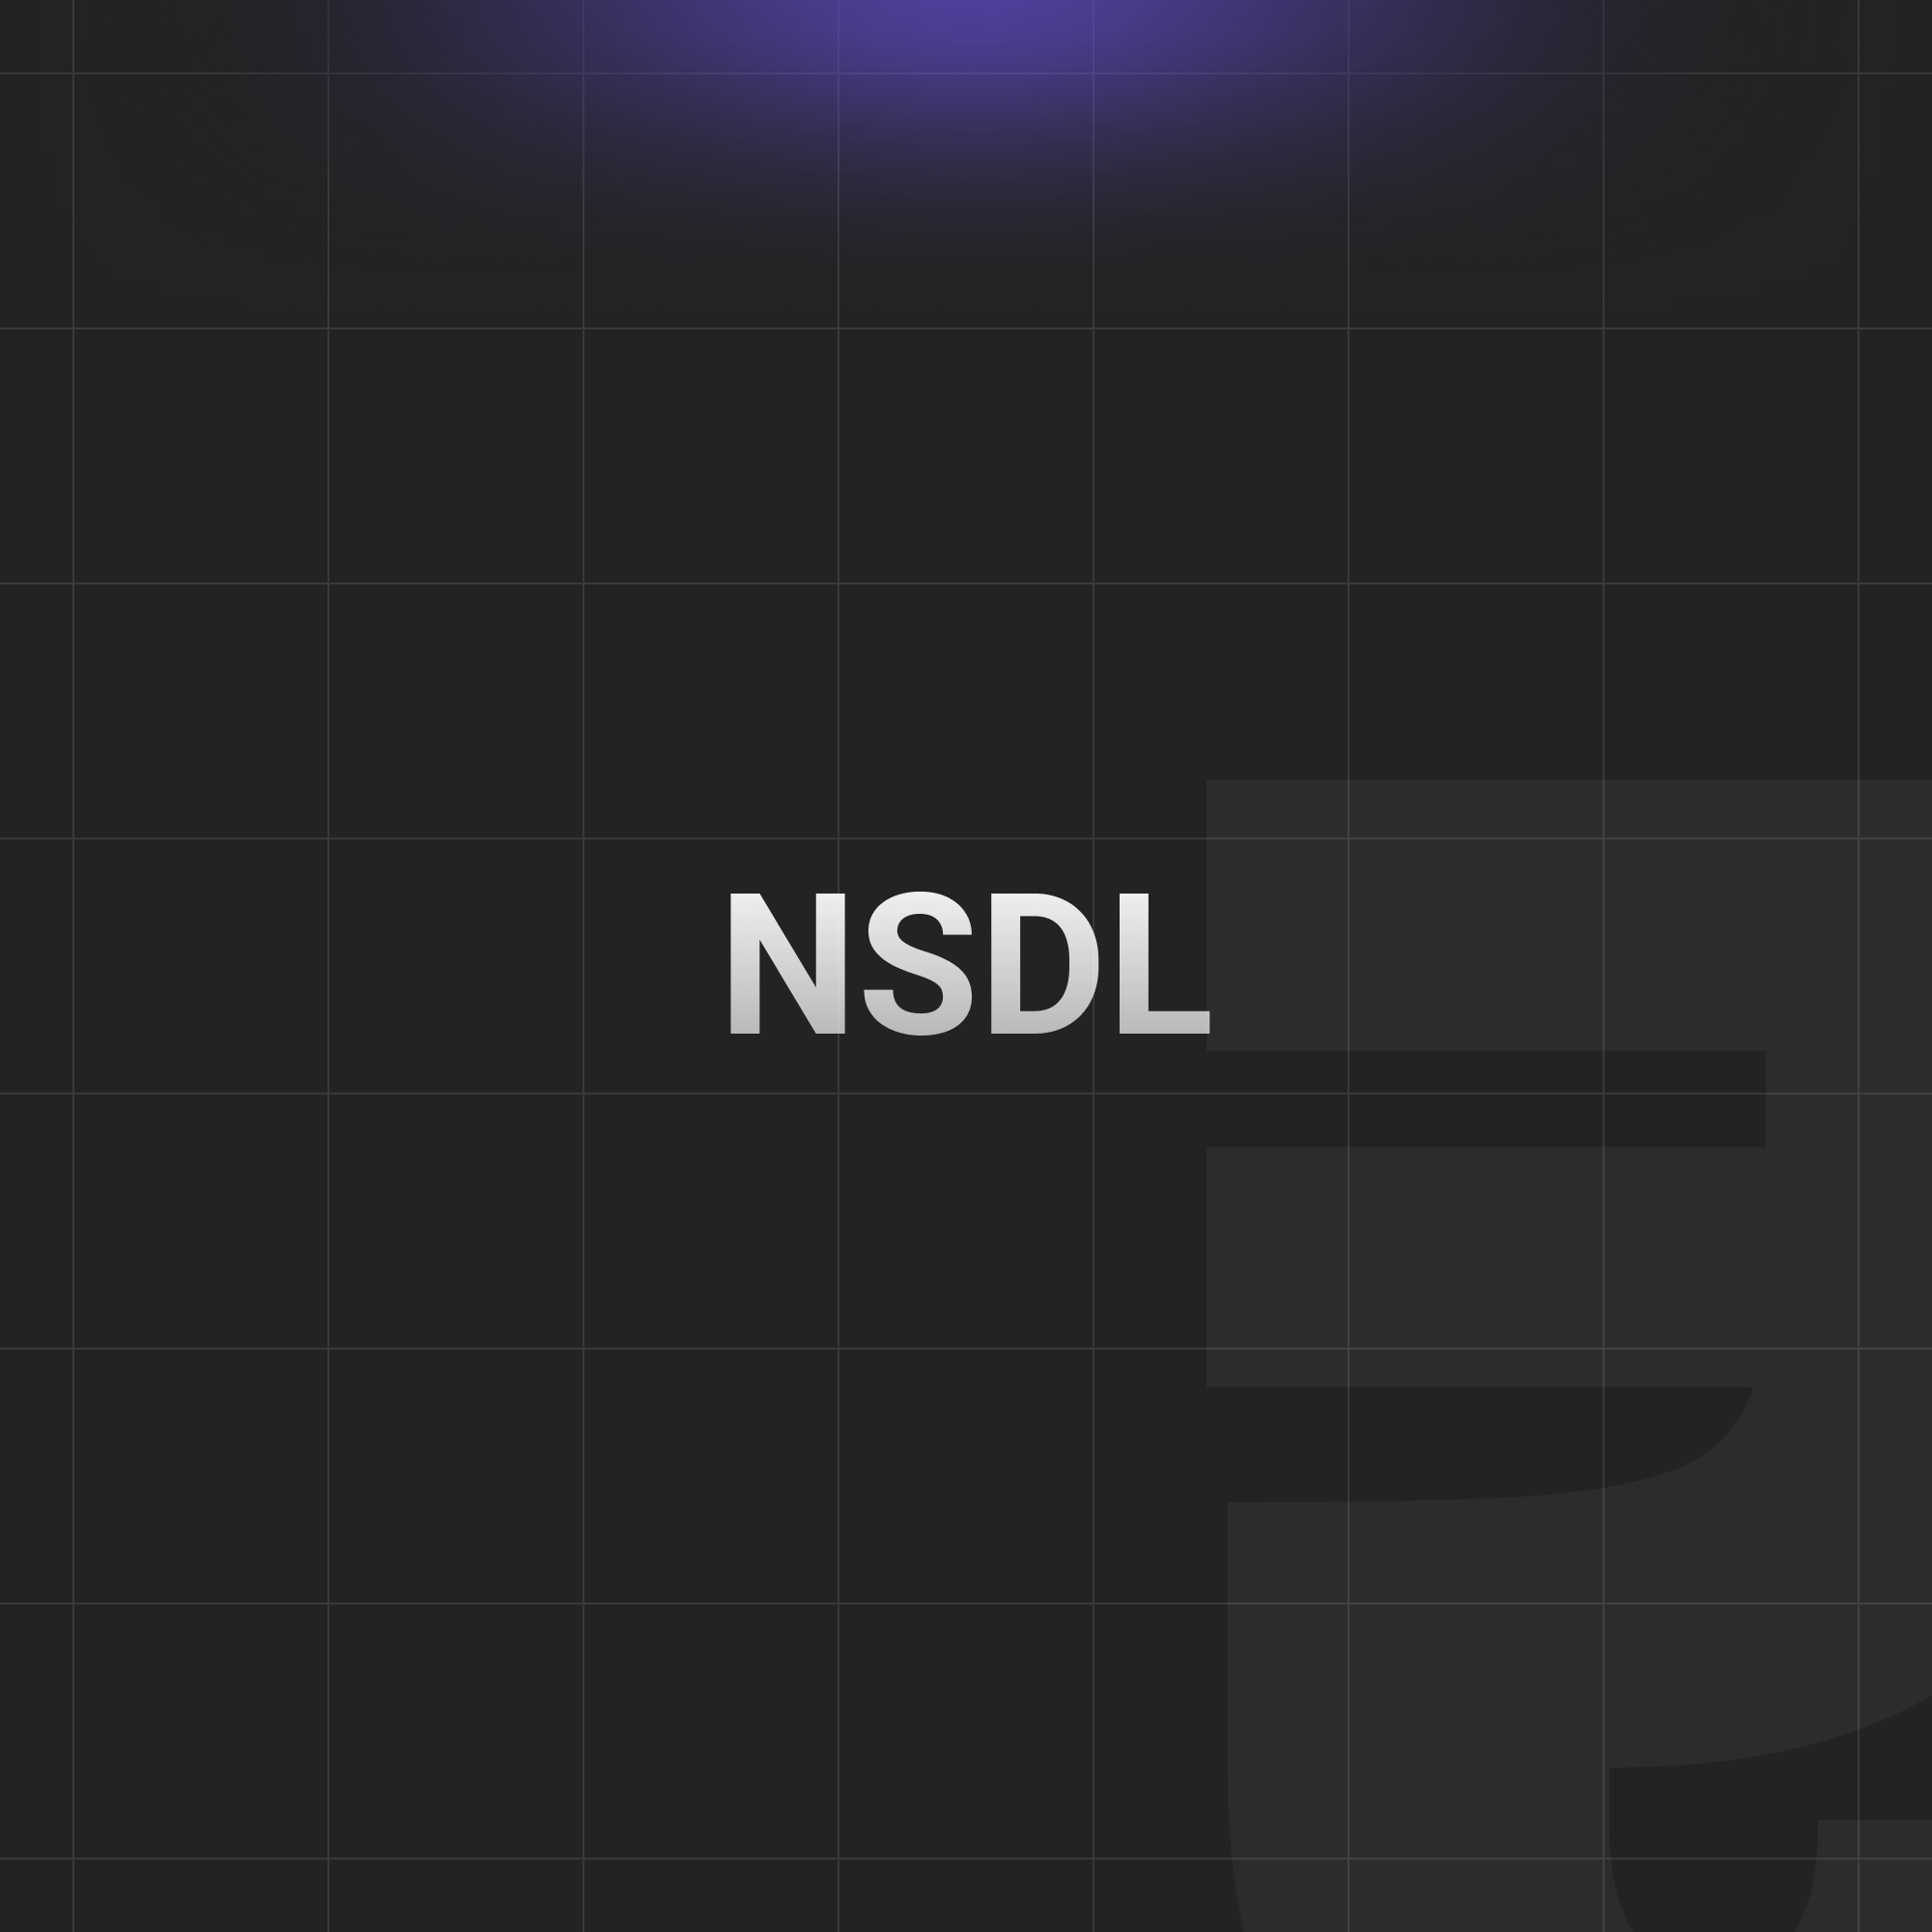 National Securities Depository Limited (NSDL) and it's role